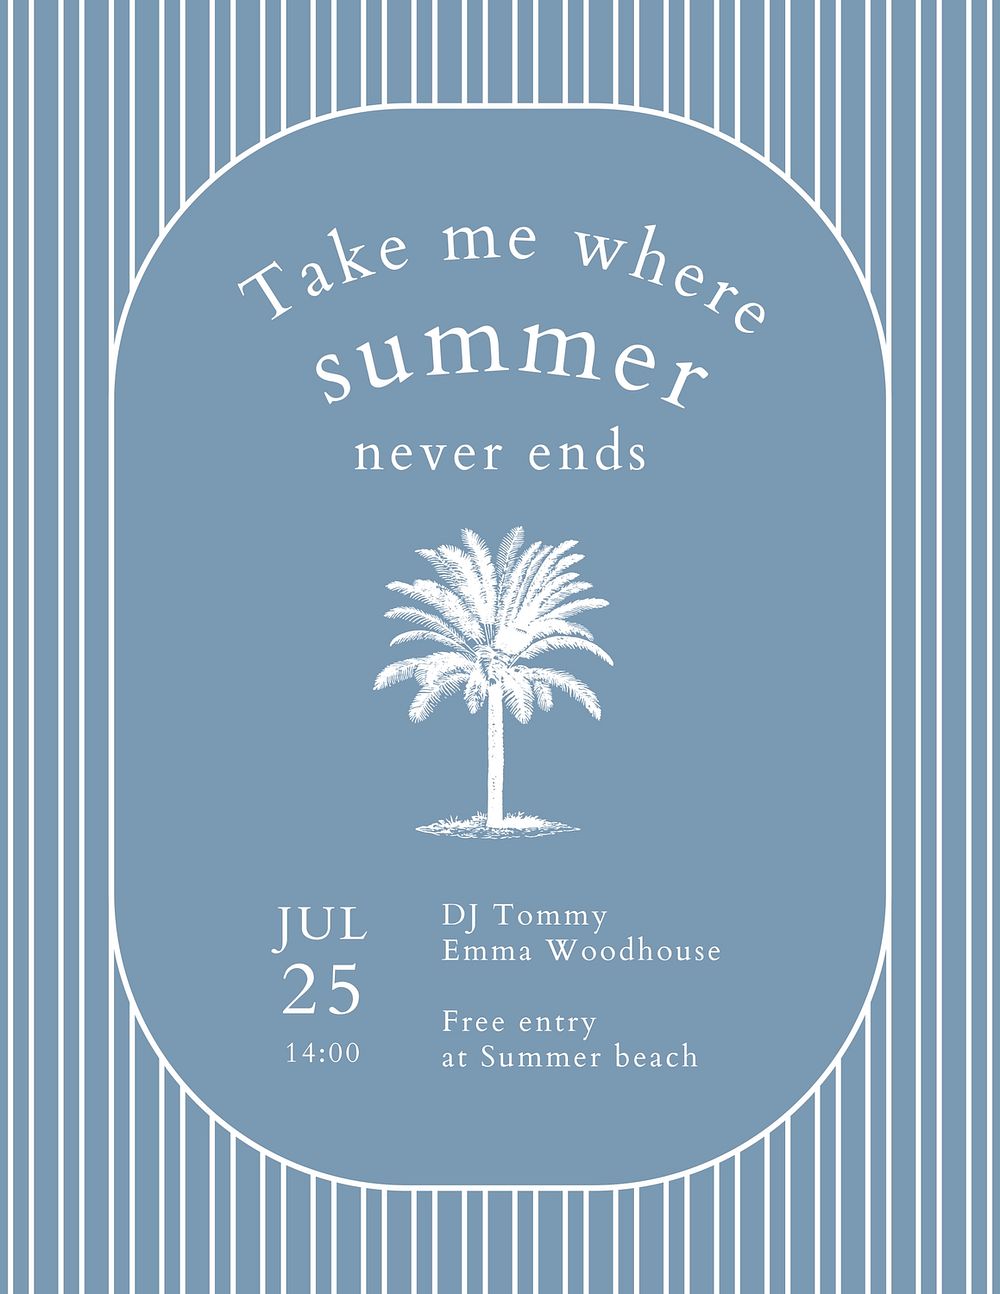 Summer concert flyer template psd with tropical background